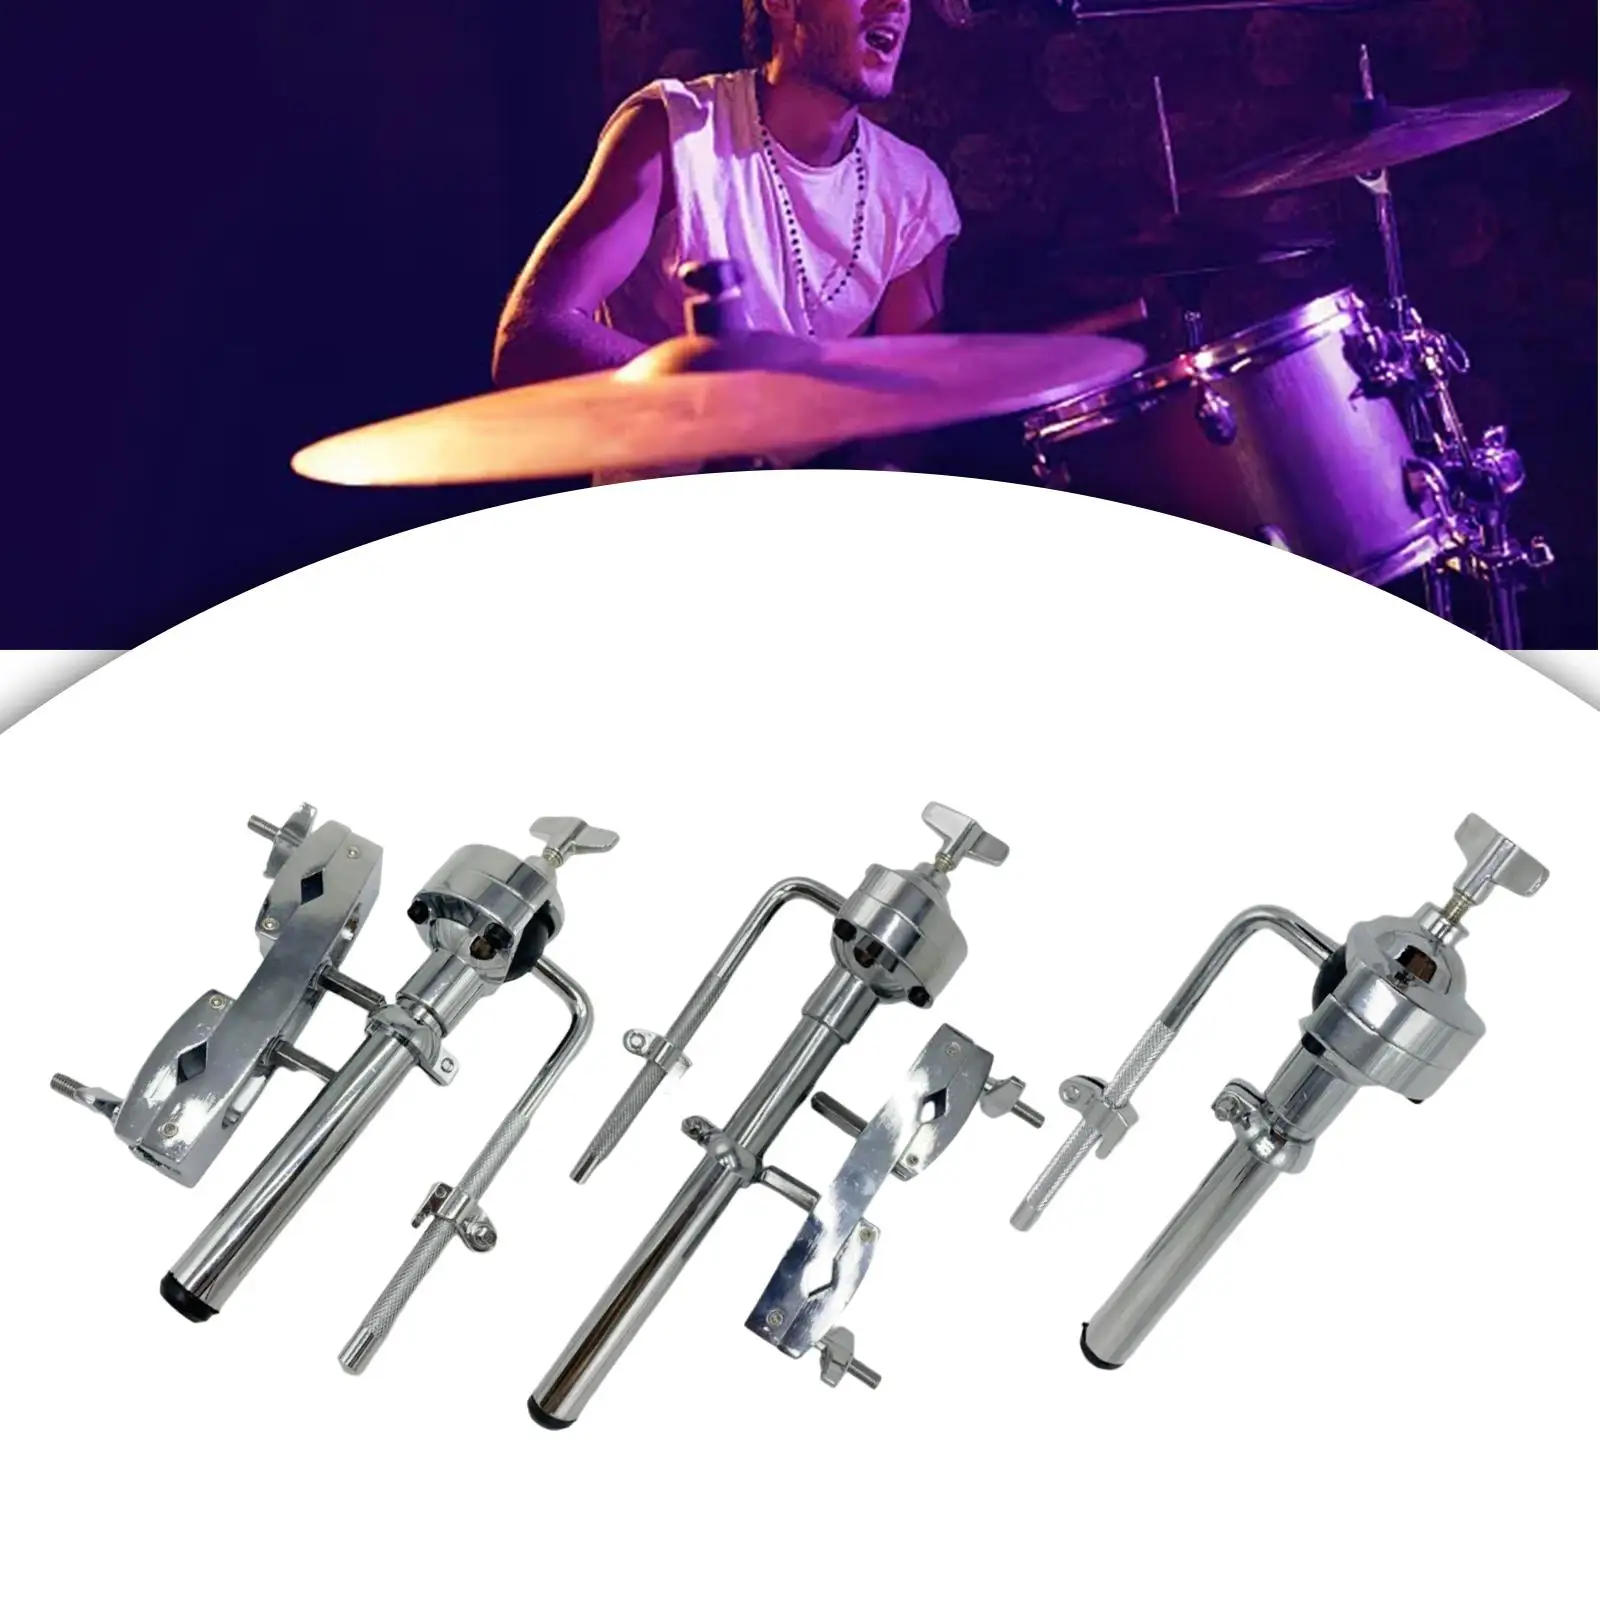 Tom Drum Stand Durable Metal for Drummer Musical Performance Drum Player Hardware Percussion Accessory Replacement